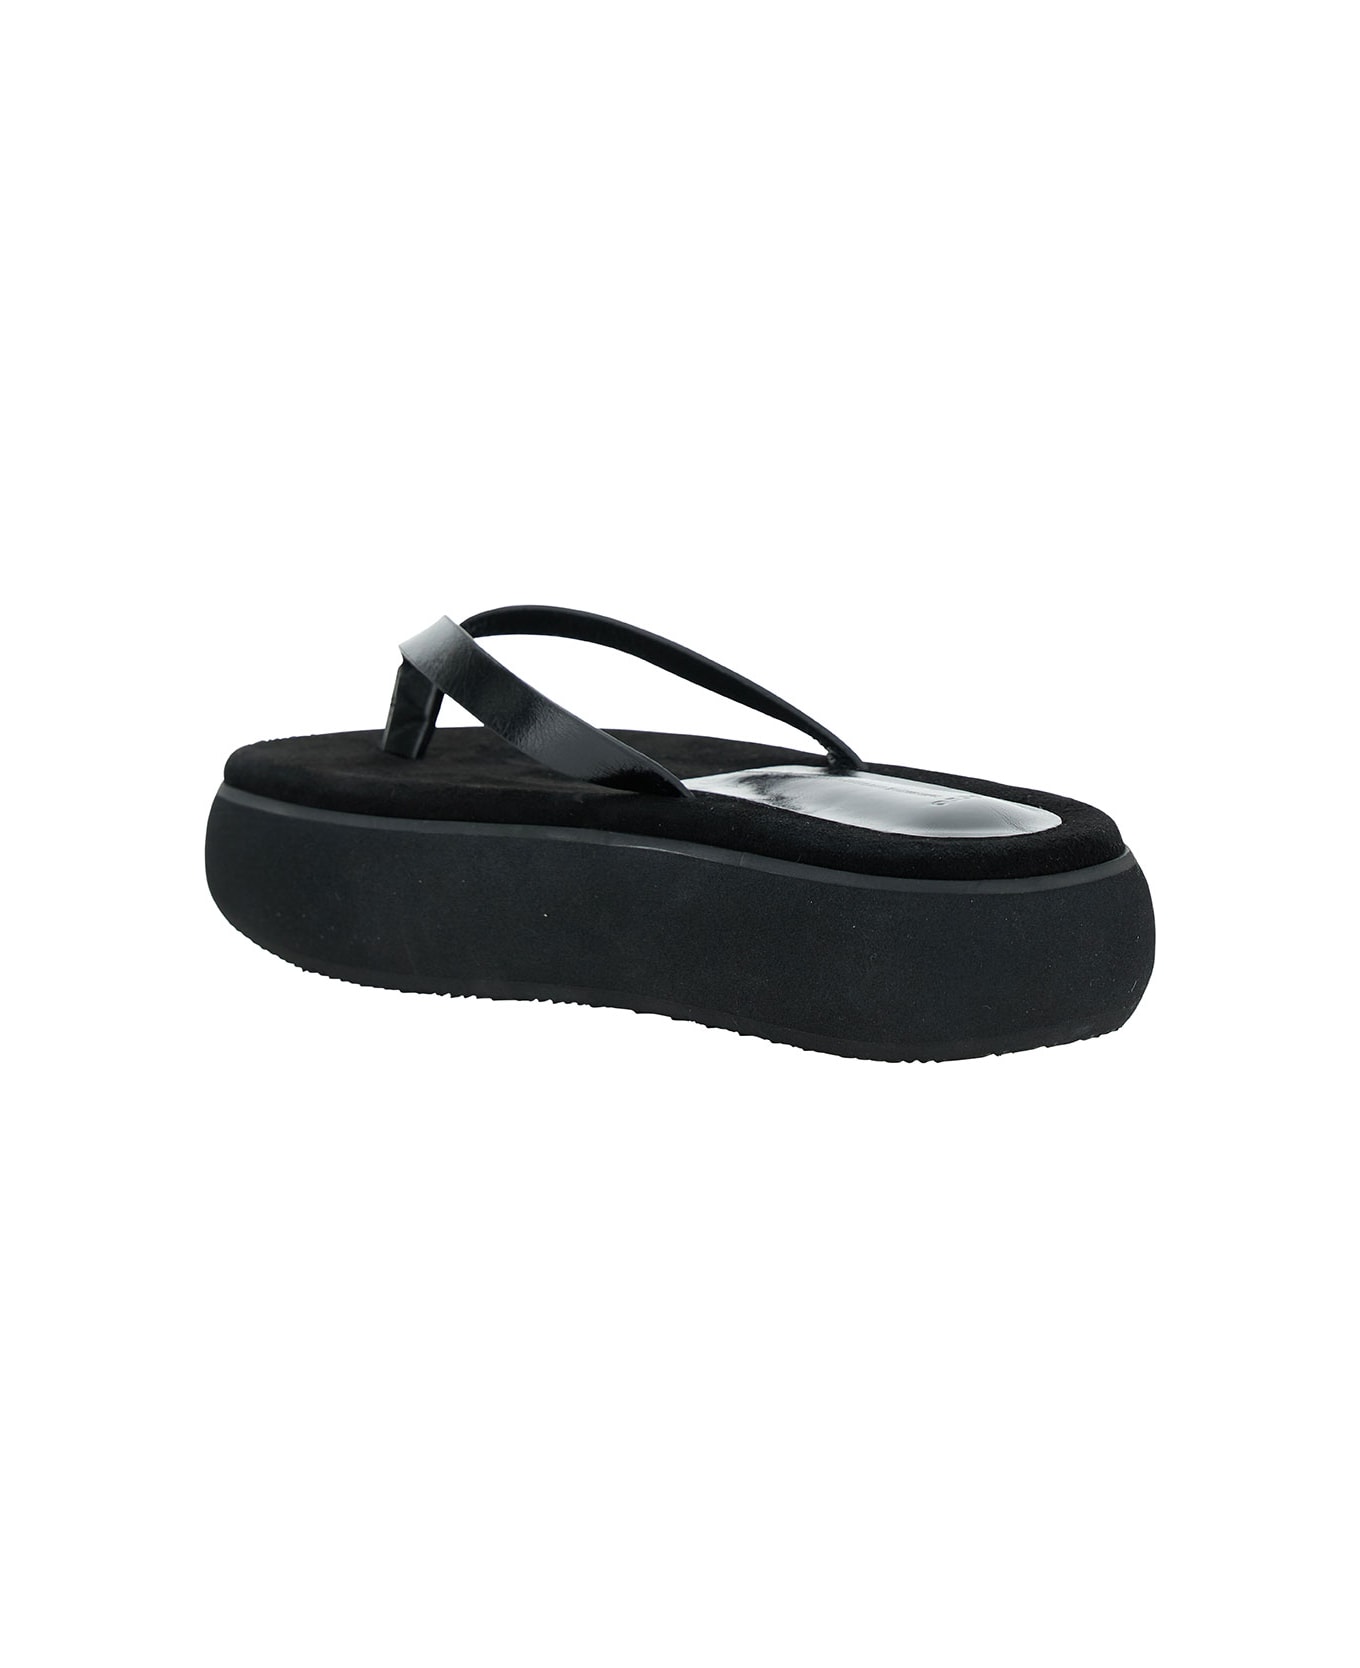 OSOI 'boat' Black Flip Flops With Chunky Sole In Leather Woman - Black